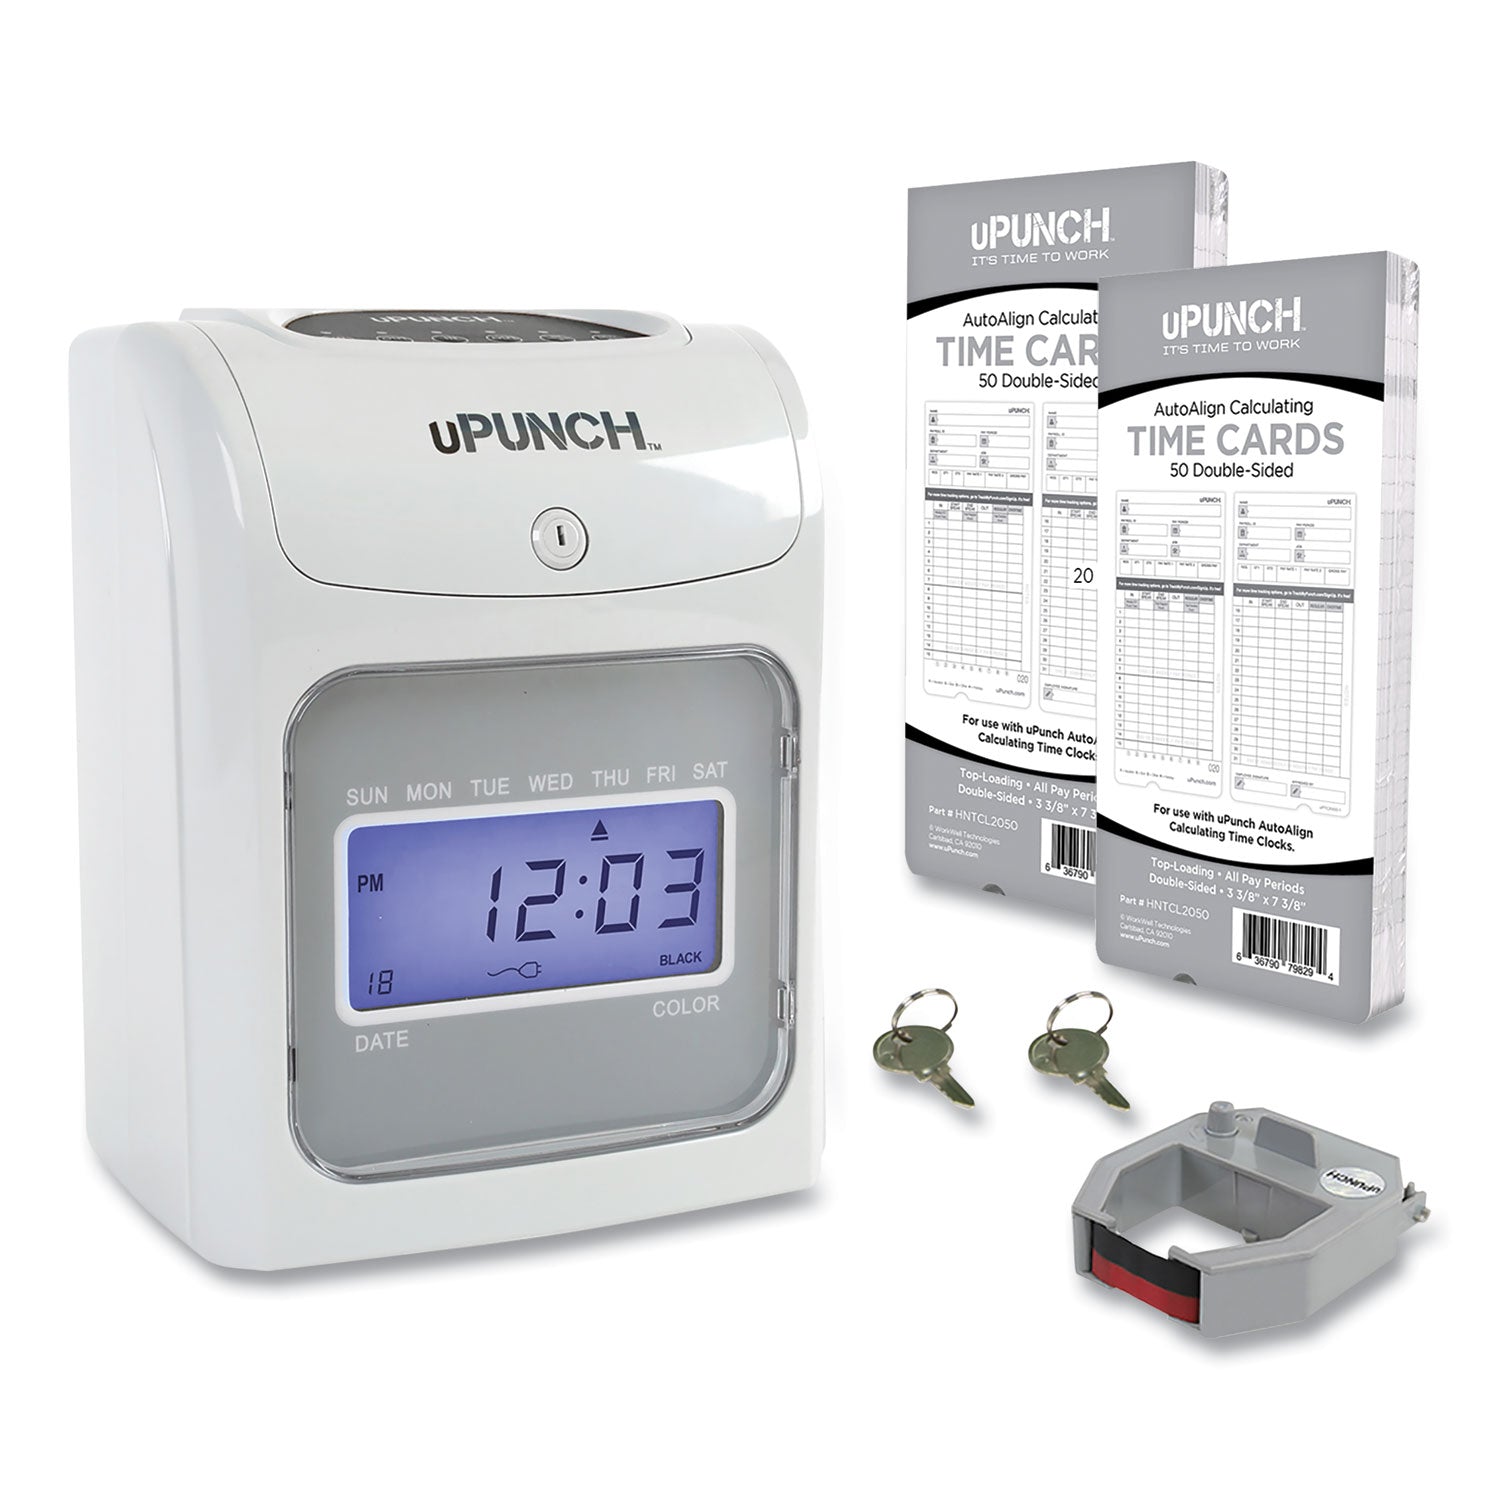 hn2500-electronic-calculating-time-clock-bundle-lcd-display-beige-gray_ppzhn2500 - 1